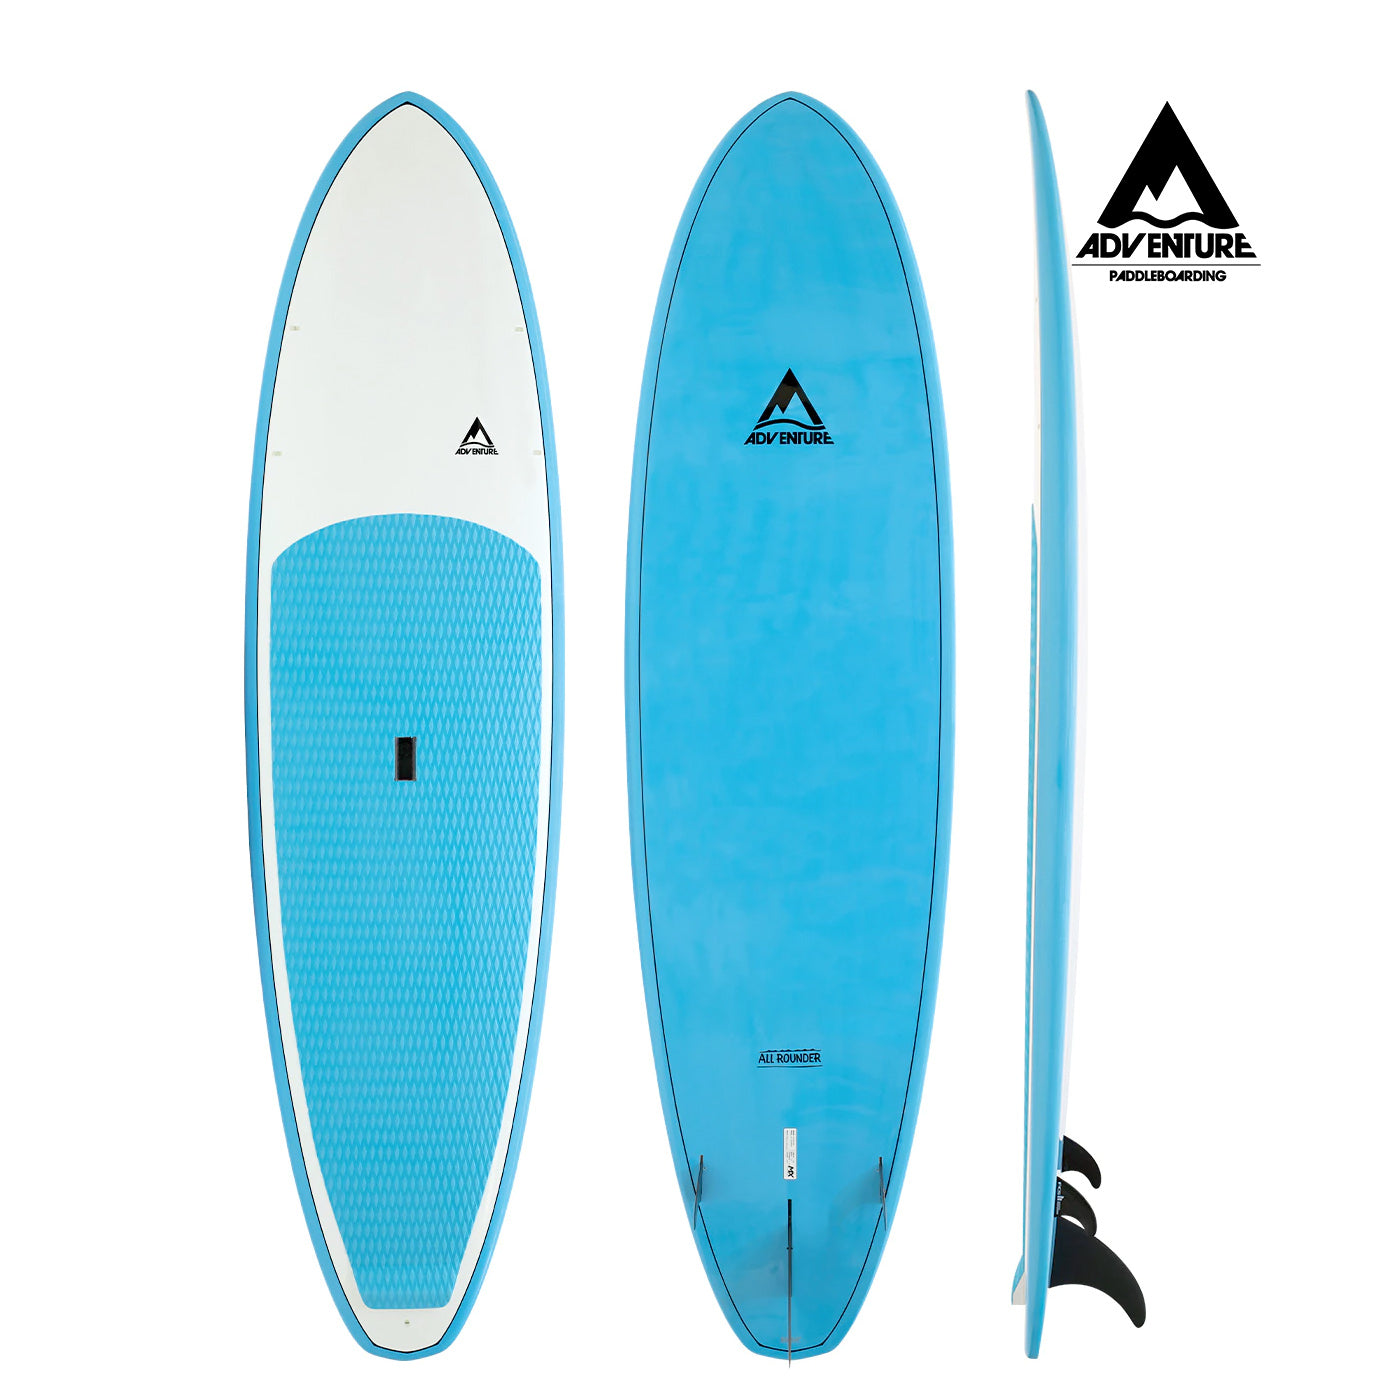 Adventure 11'6 Stand Up Paddleboard SUP All Rounder MX, Blue